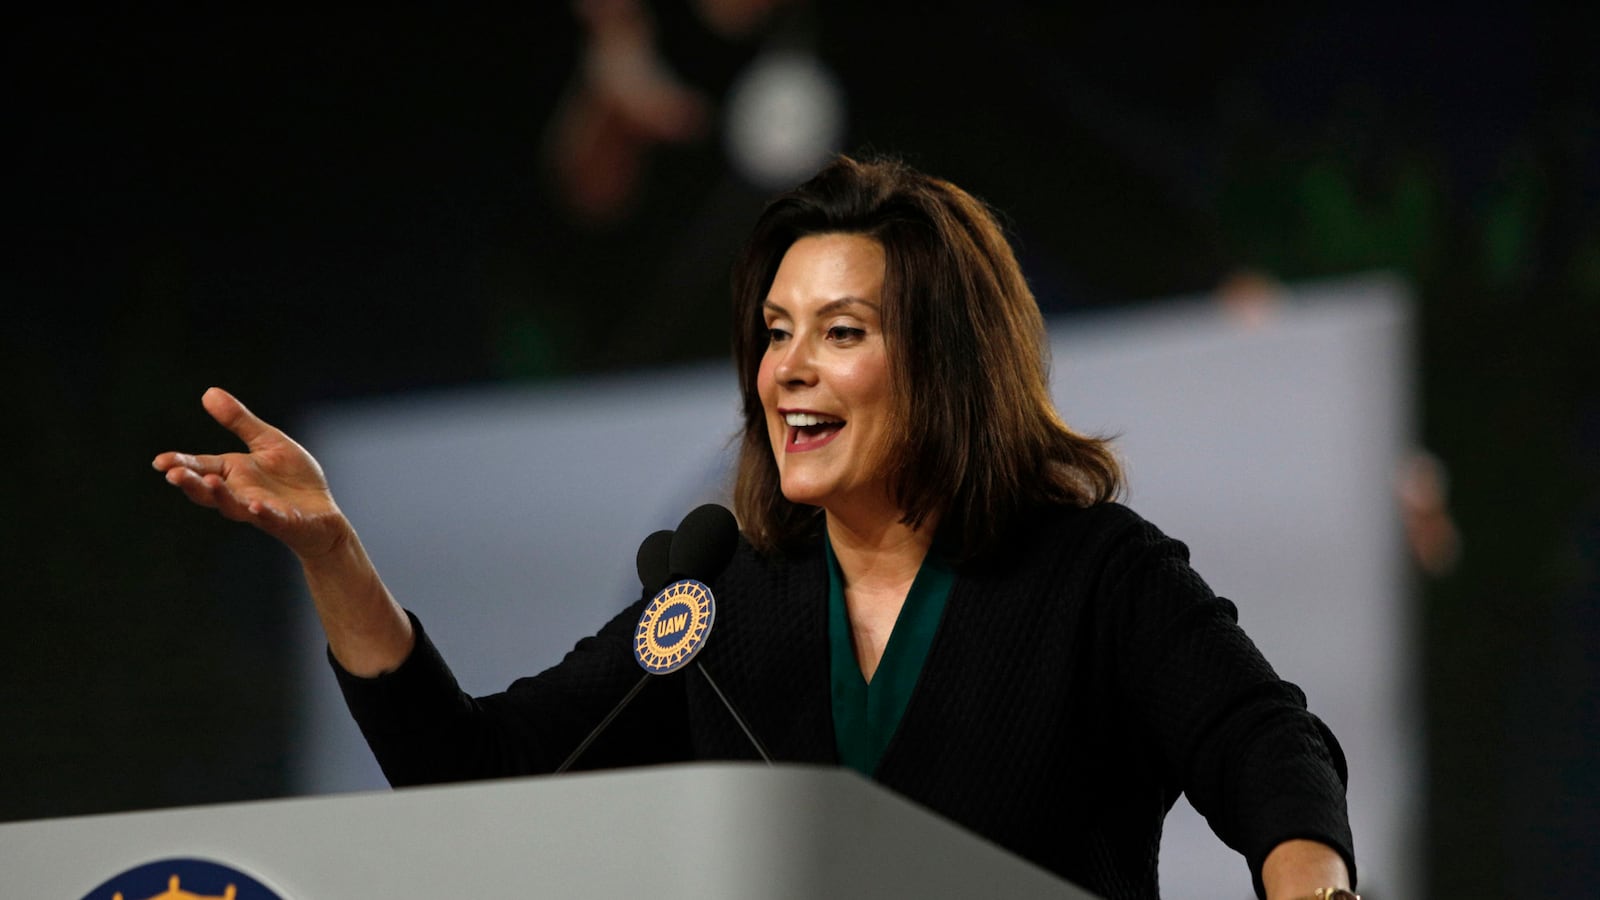 Gretchen Whitmer addressed the 37th United Auto Workers Constitutional Convention in June at Cobo Center in Detroit.